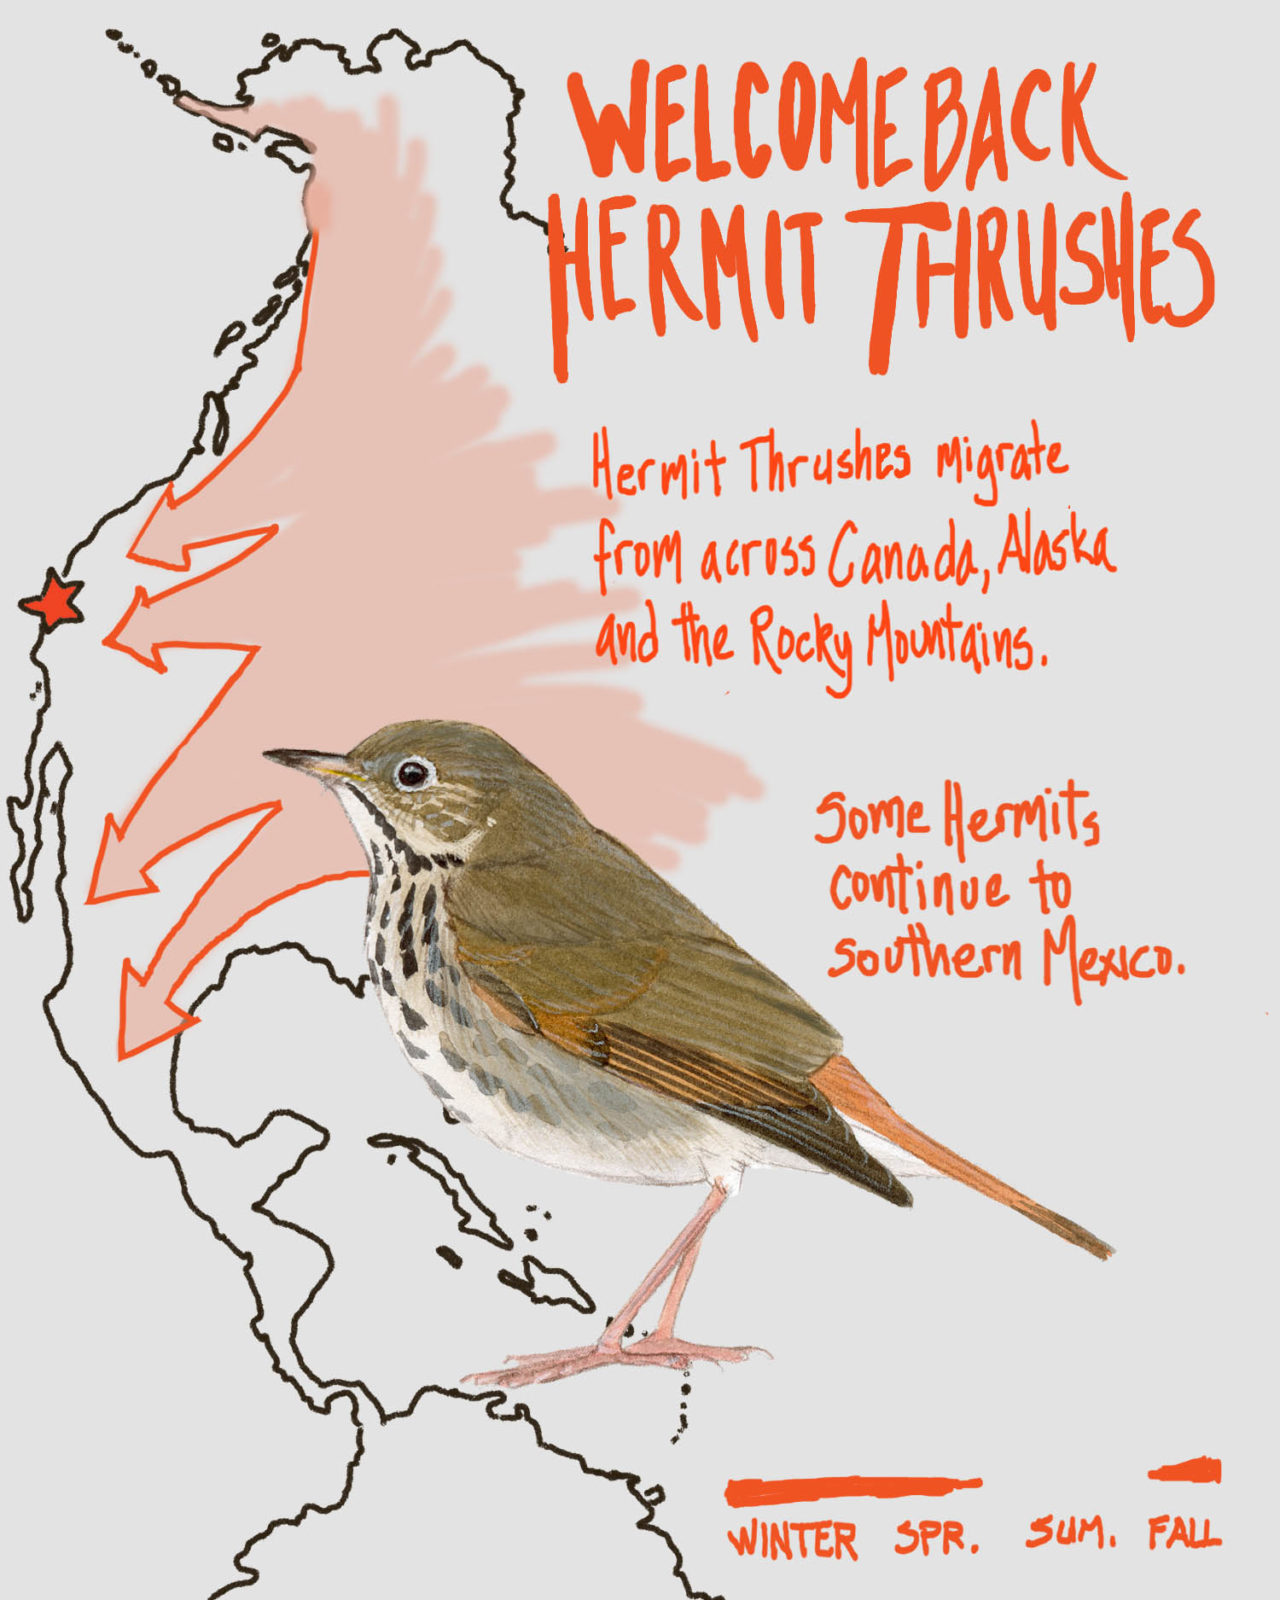 We also welcome back hermit thrushes, which fly our way from across Canada, Alaka and the Rocky Mountains. Some of them keep going down to Mexico.